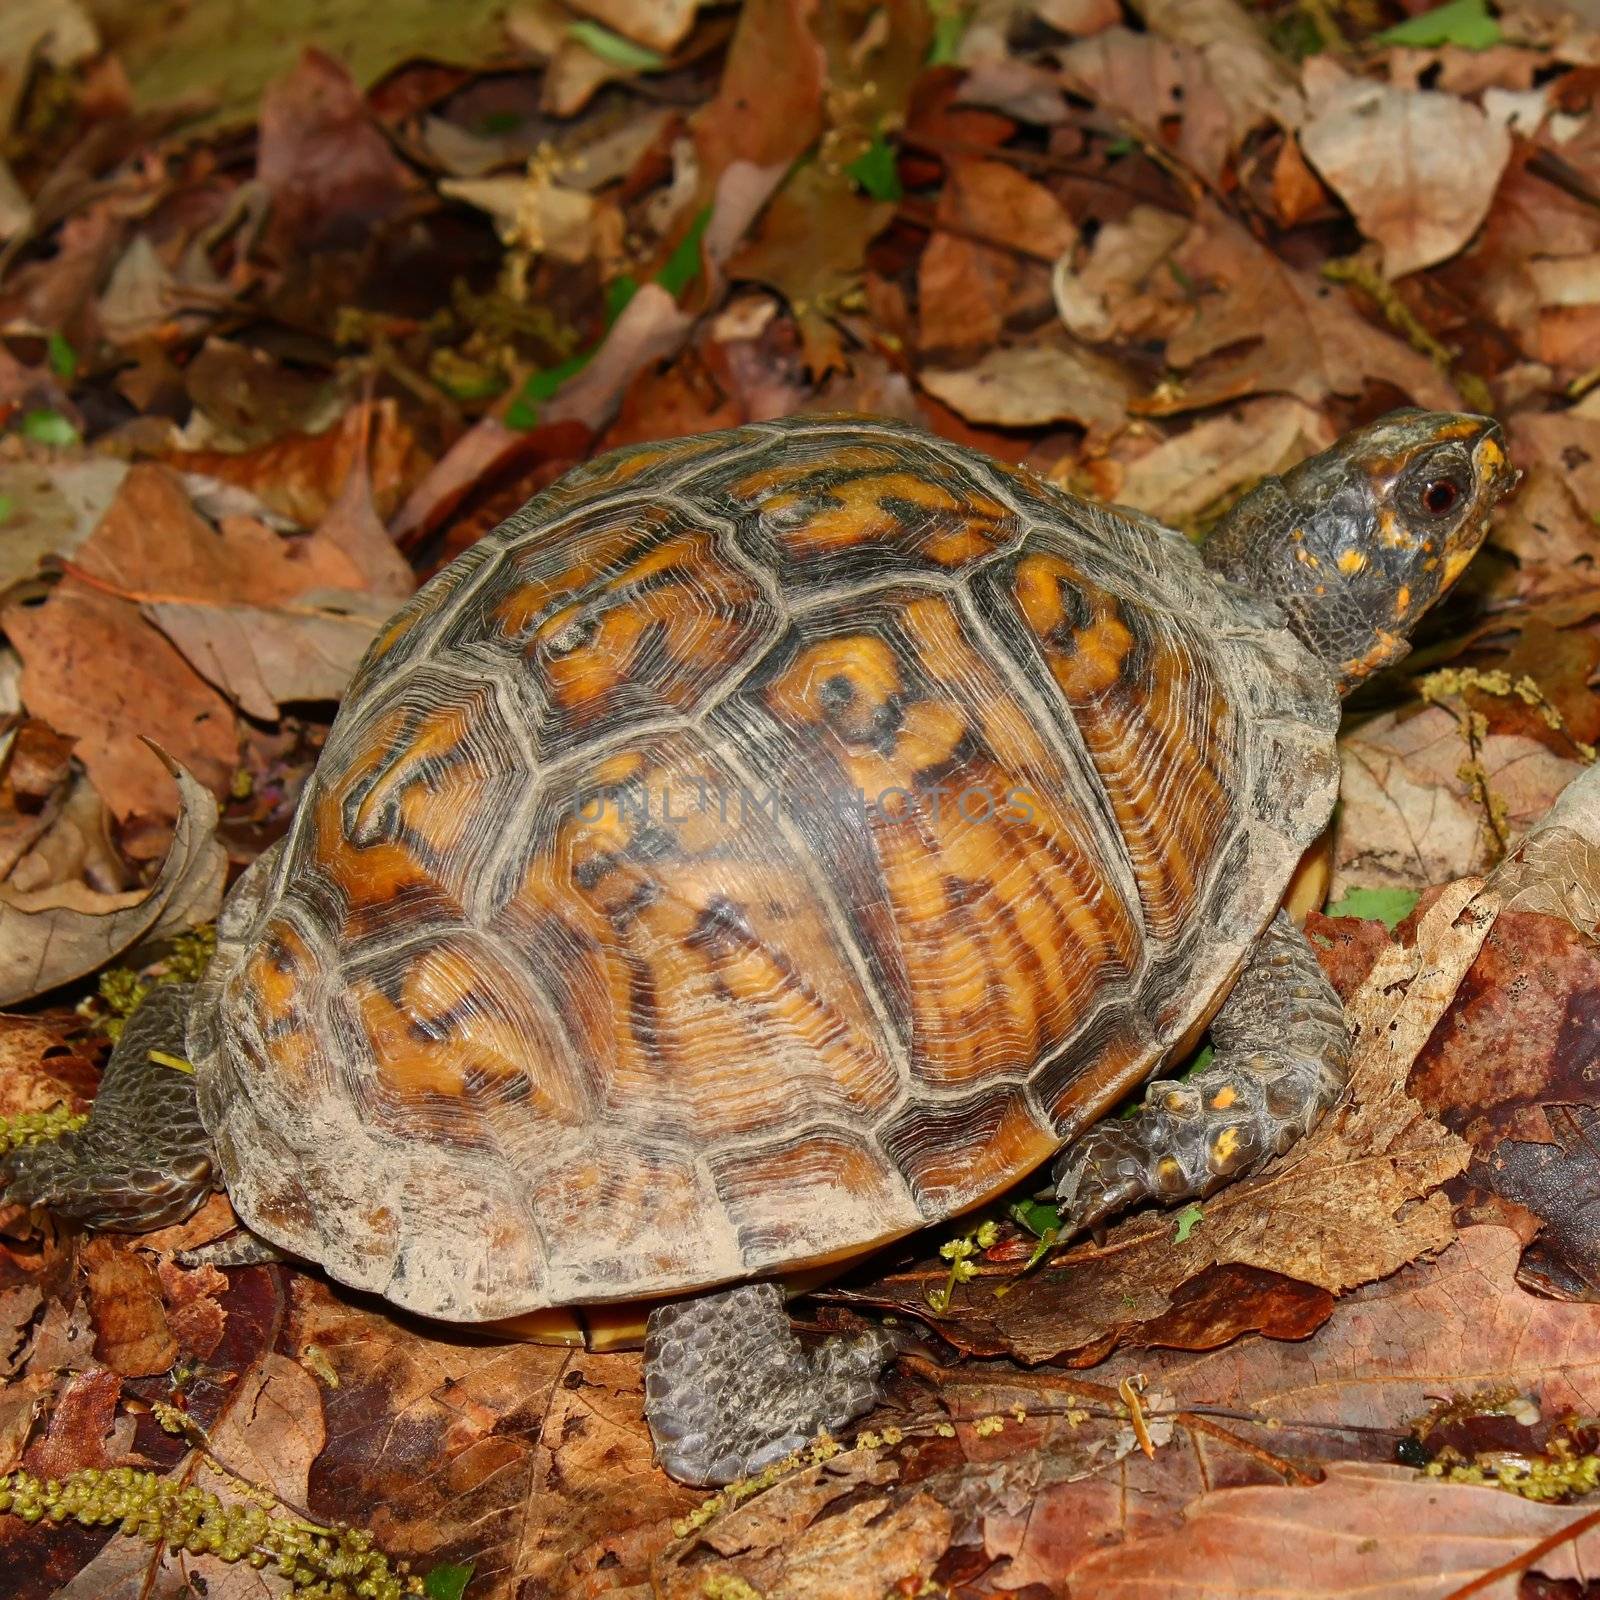 Box Turtle in Alabama by Wirepec